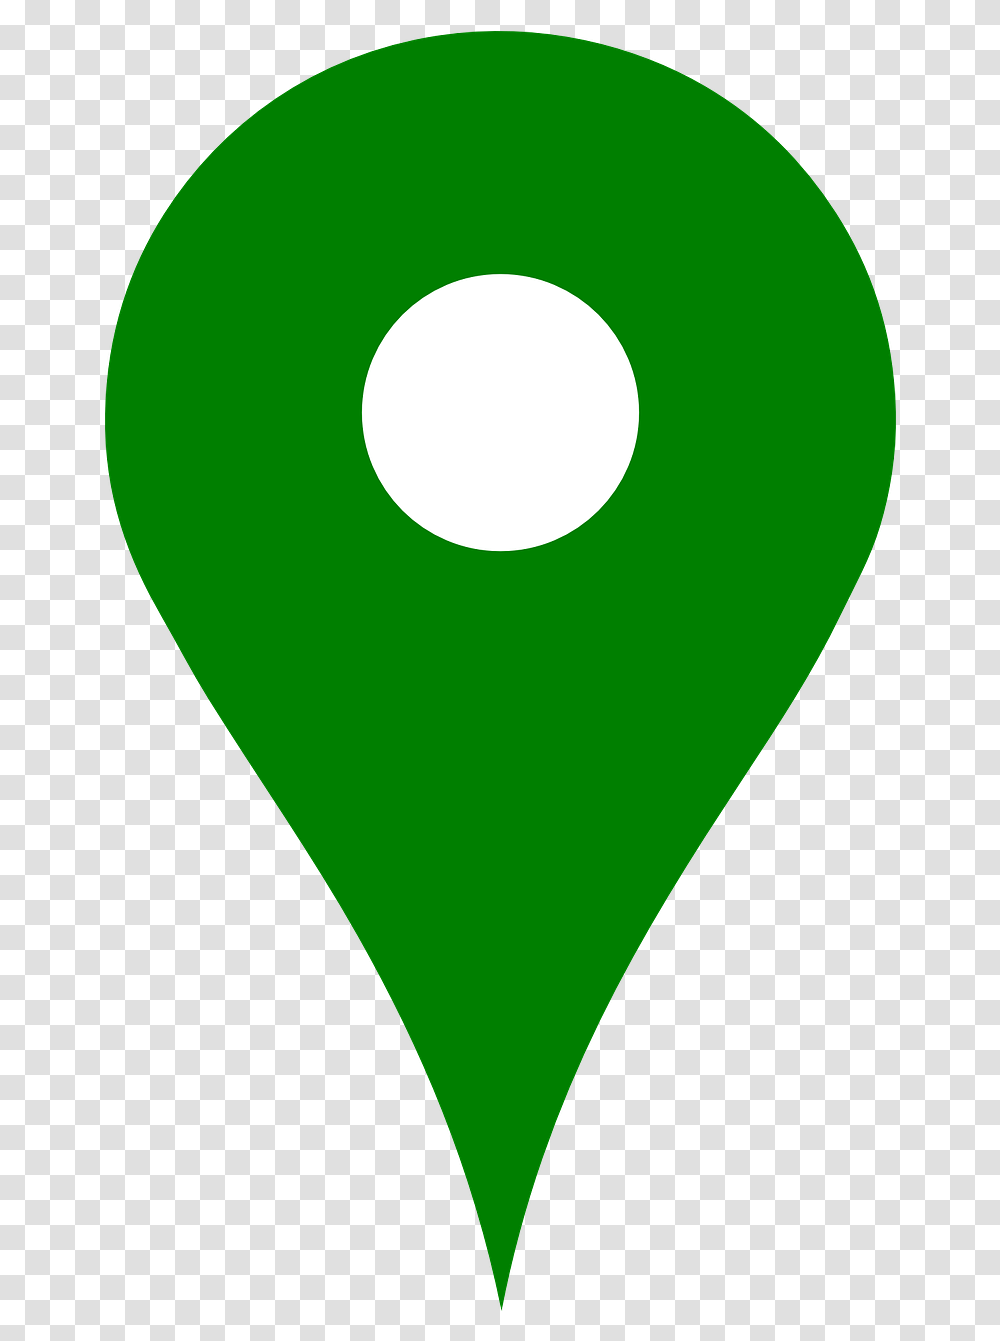 Download Map Marker Google Map Icon Green, Light, Heart, Plectrum, Ball Transparent Png